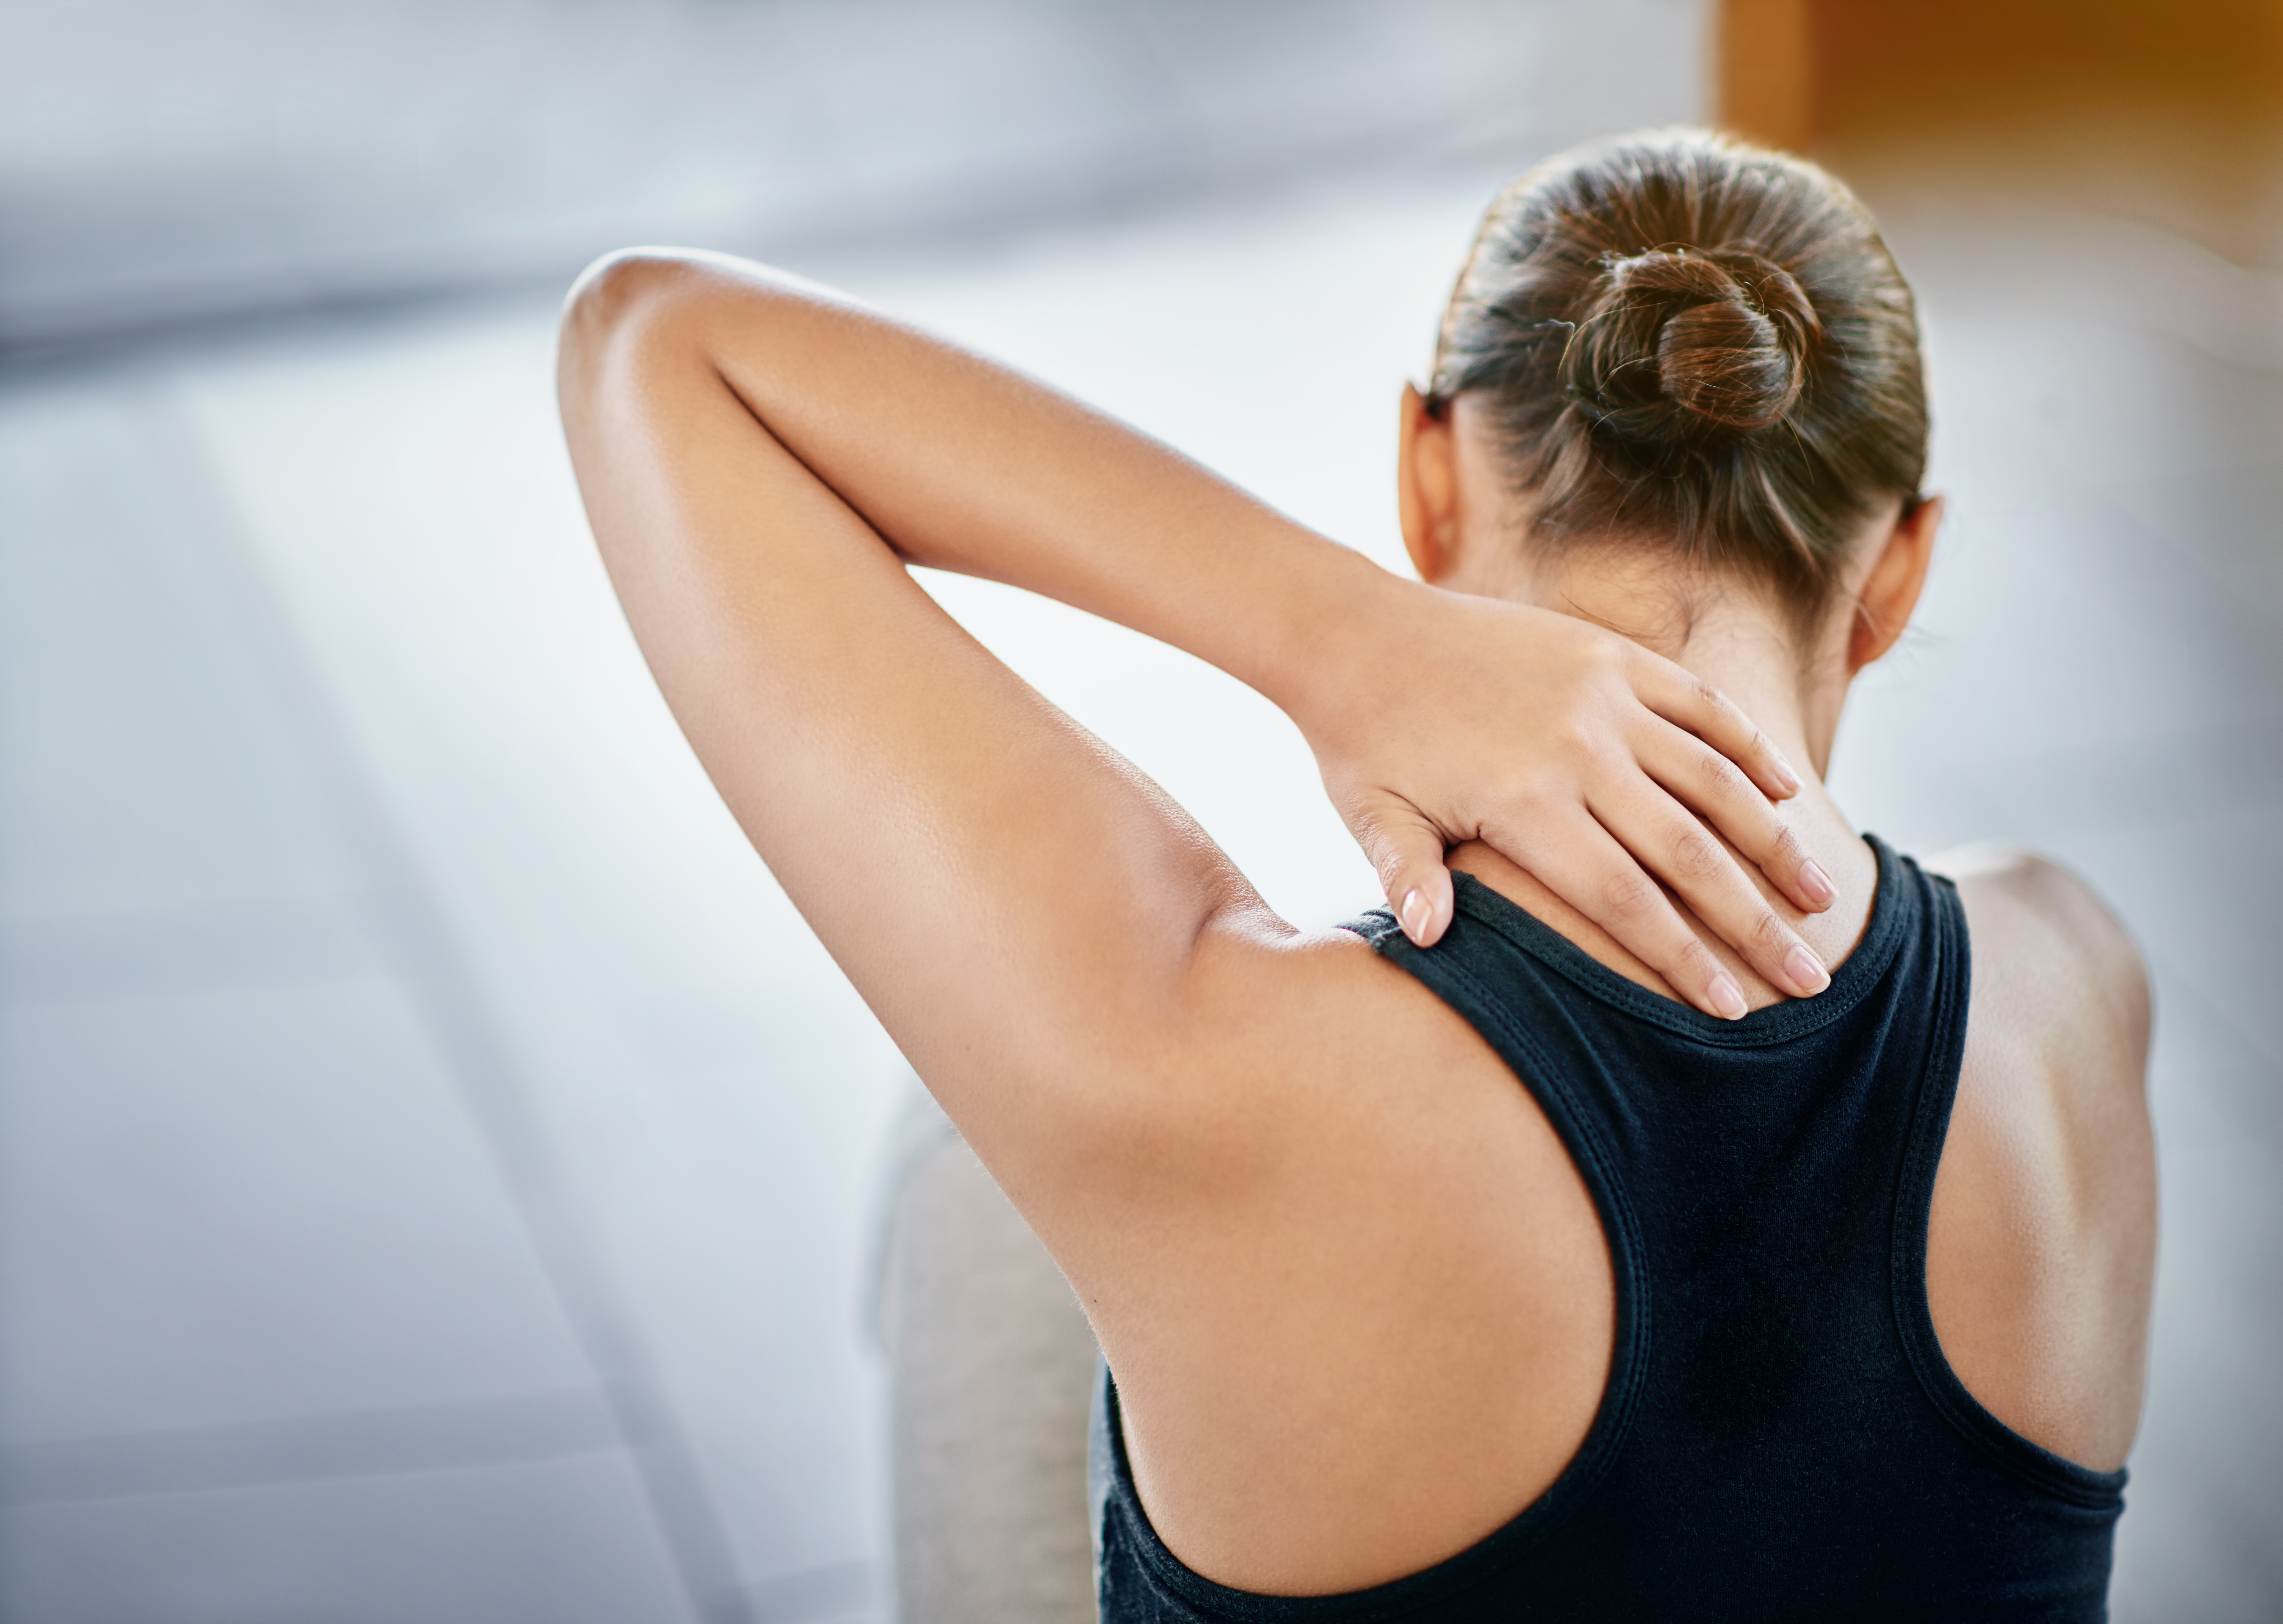 Home exercises to reduce Neck and Shoulder pain Relief